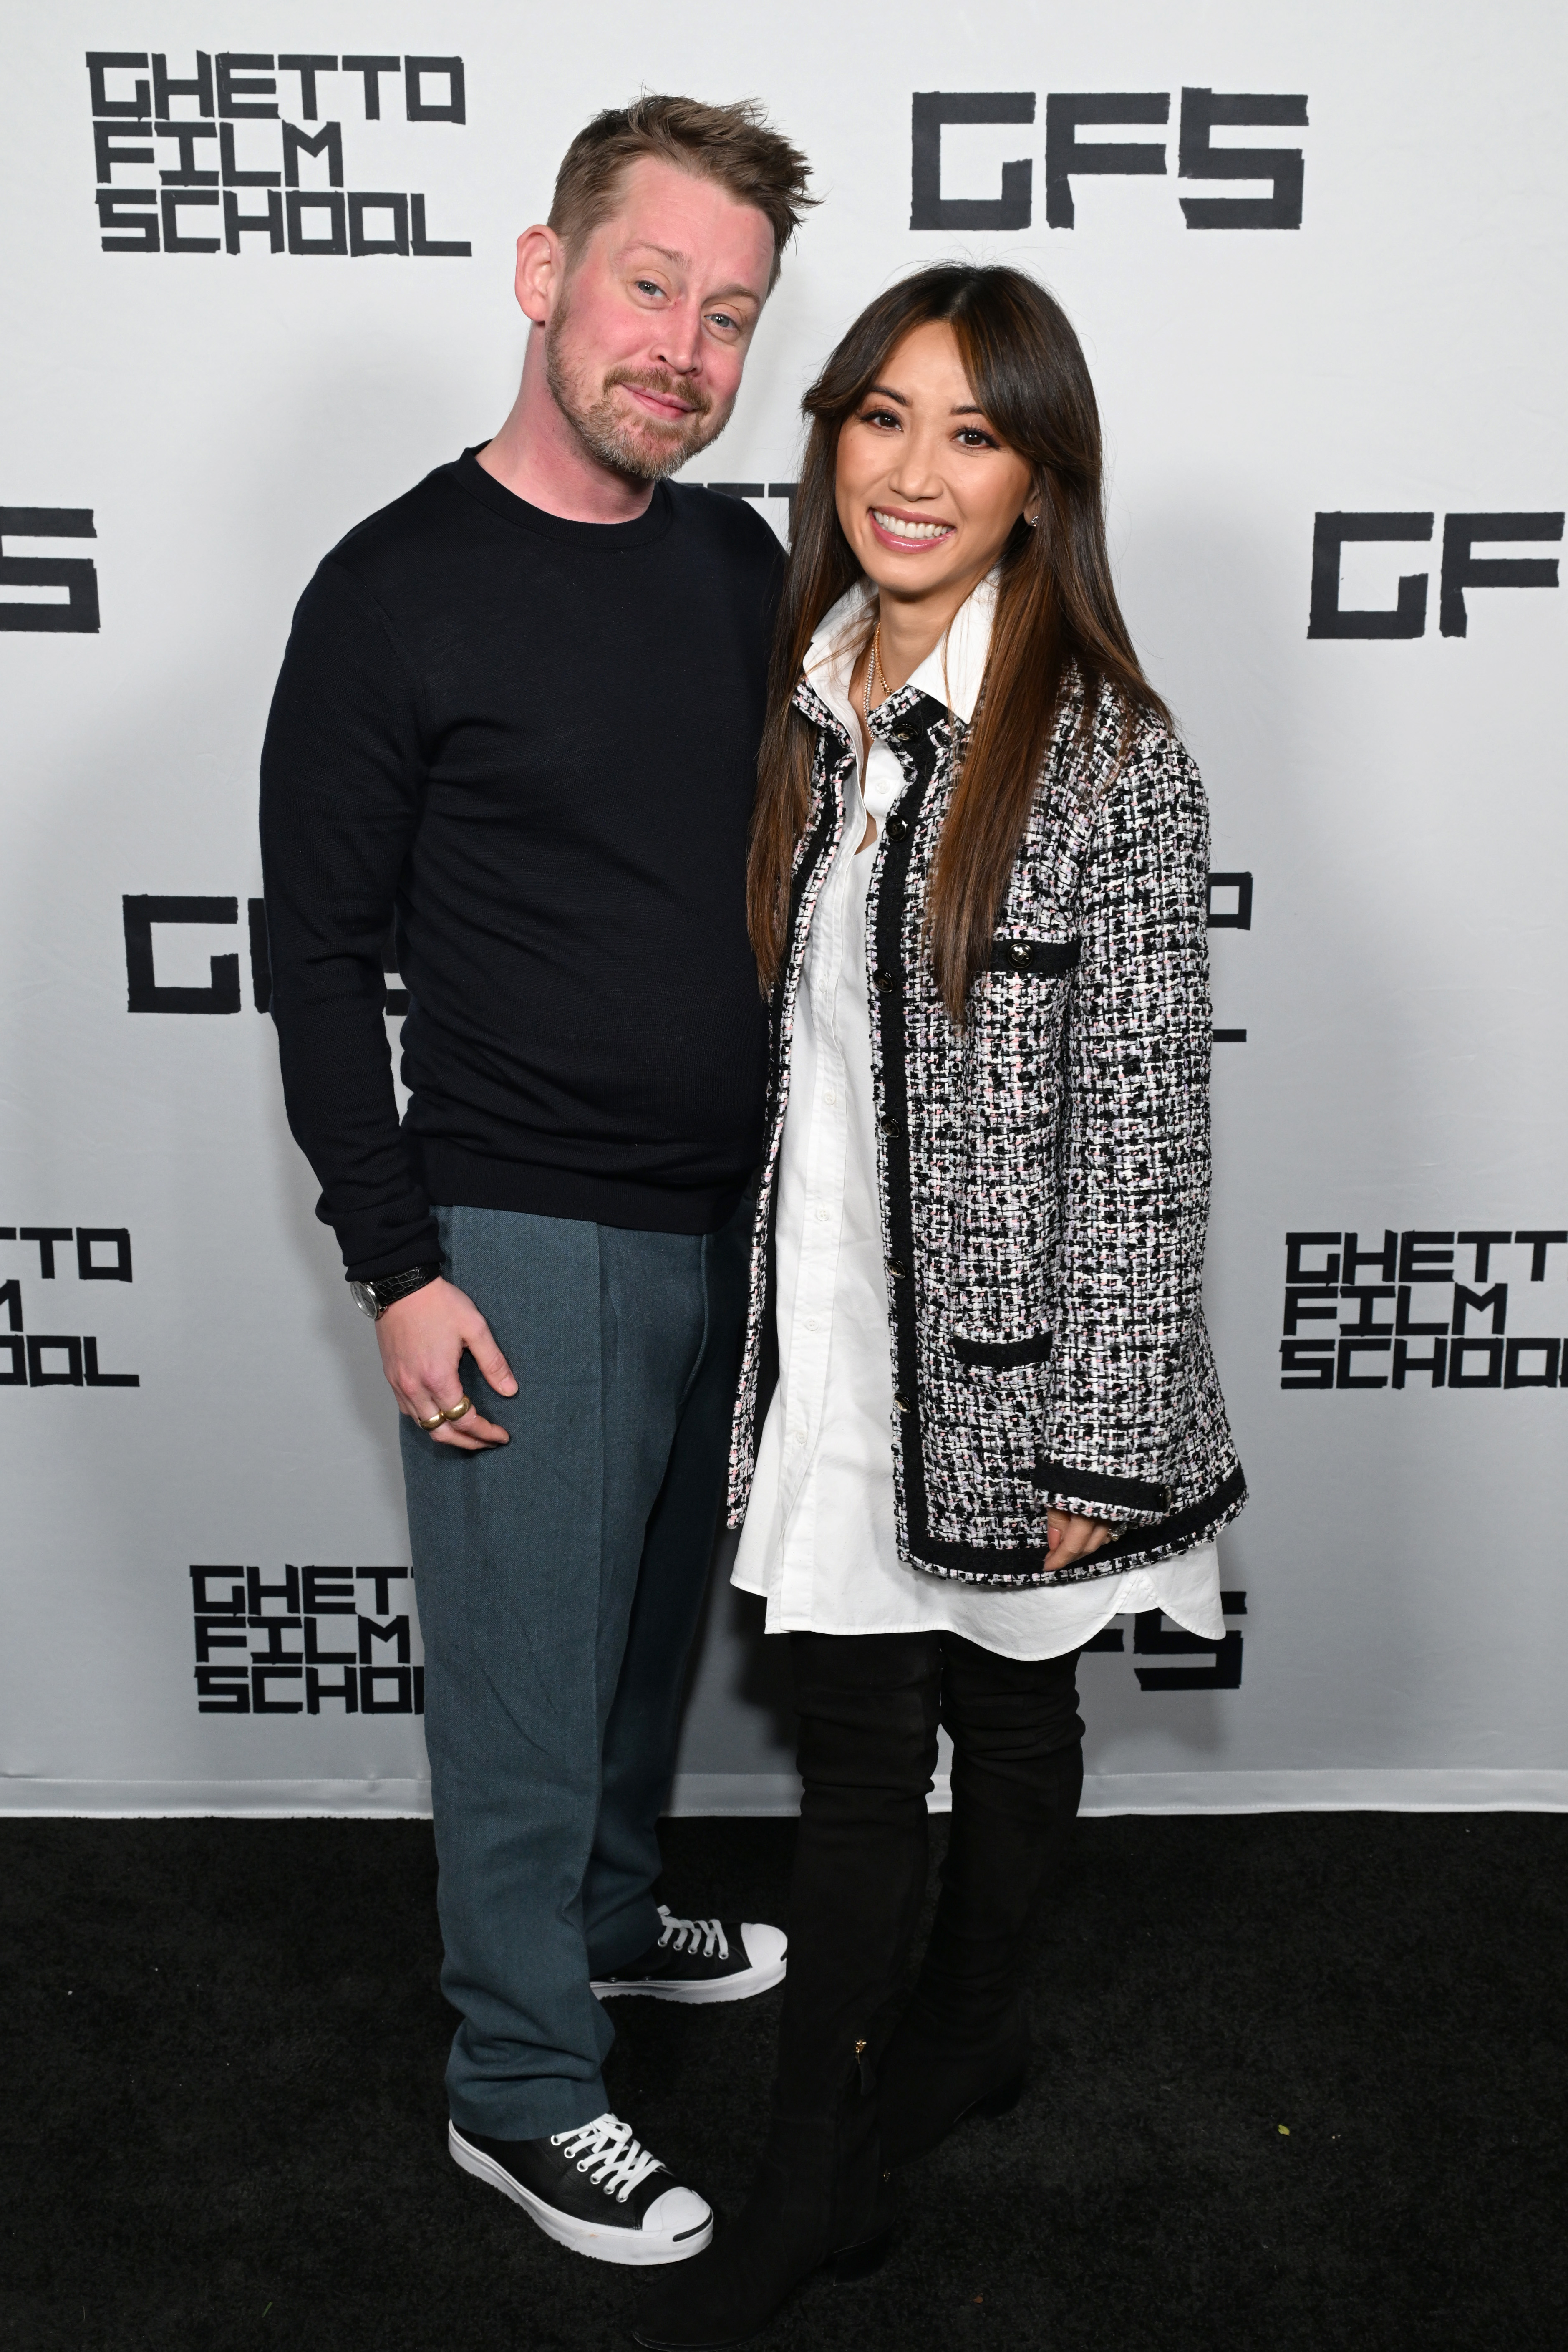 Close-up of Macaulay in a top, pants, and sneakers at a media event with Brenda Song